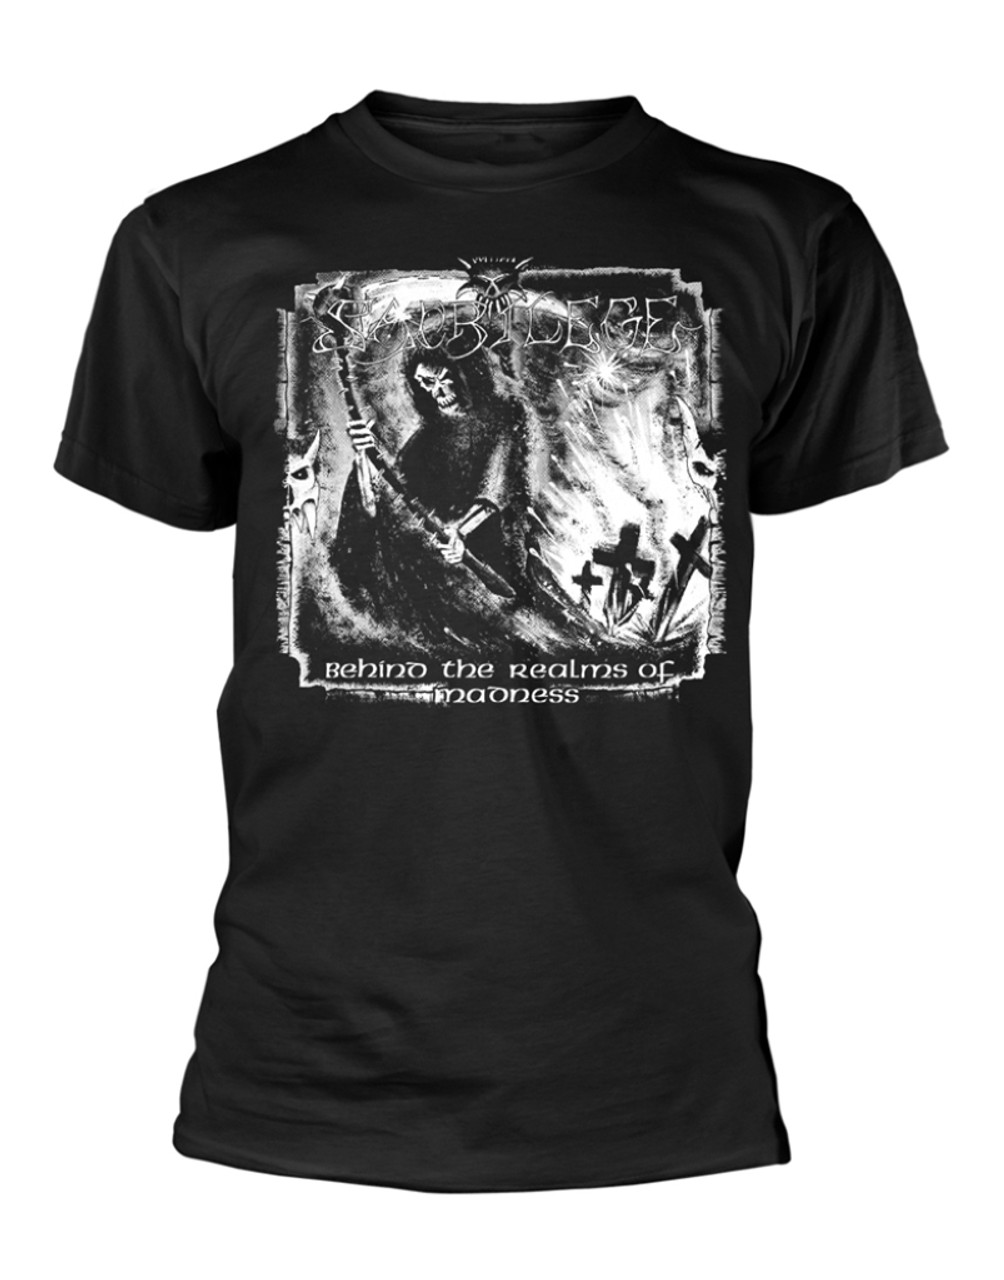 Sacrilege 'Behind The Realms Of Madness' (Black) T-Shirt